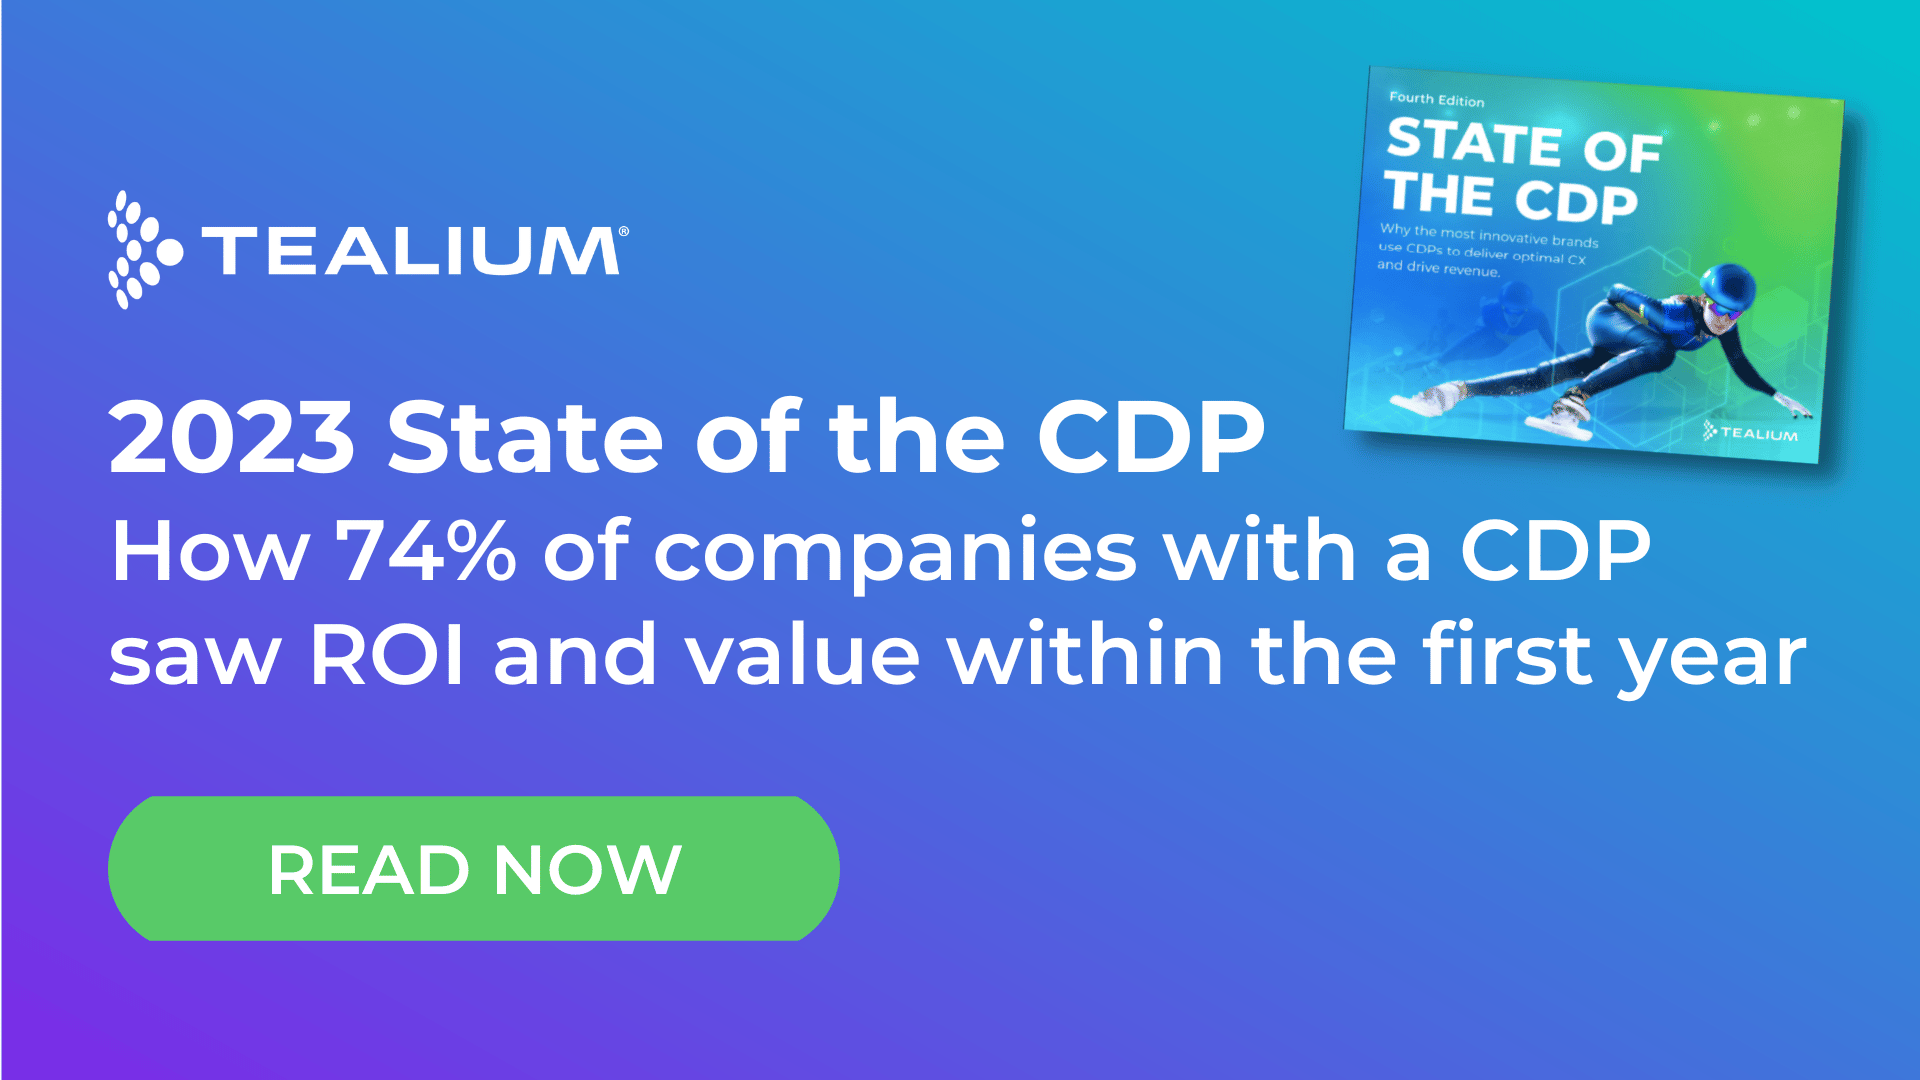 Tealium 2023 State Of The CDP Featured Image Report 1920x1080 1 800x450